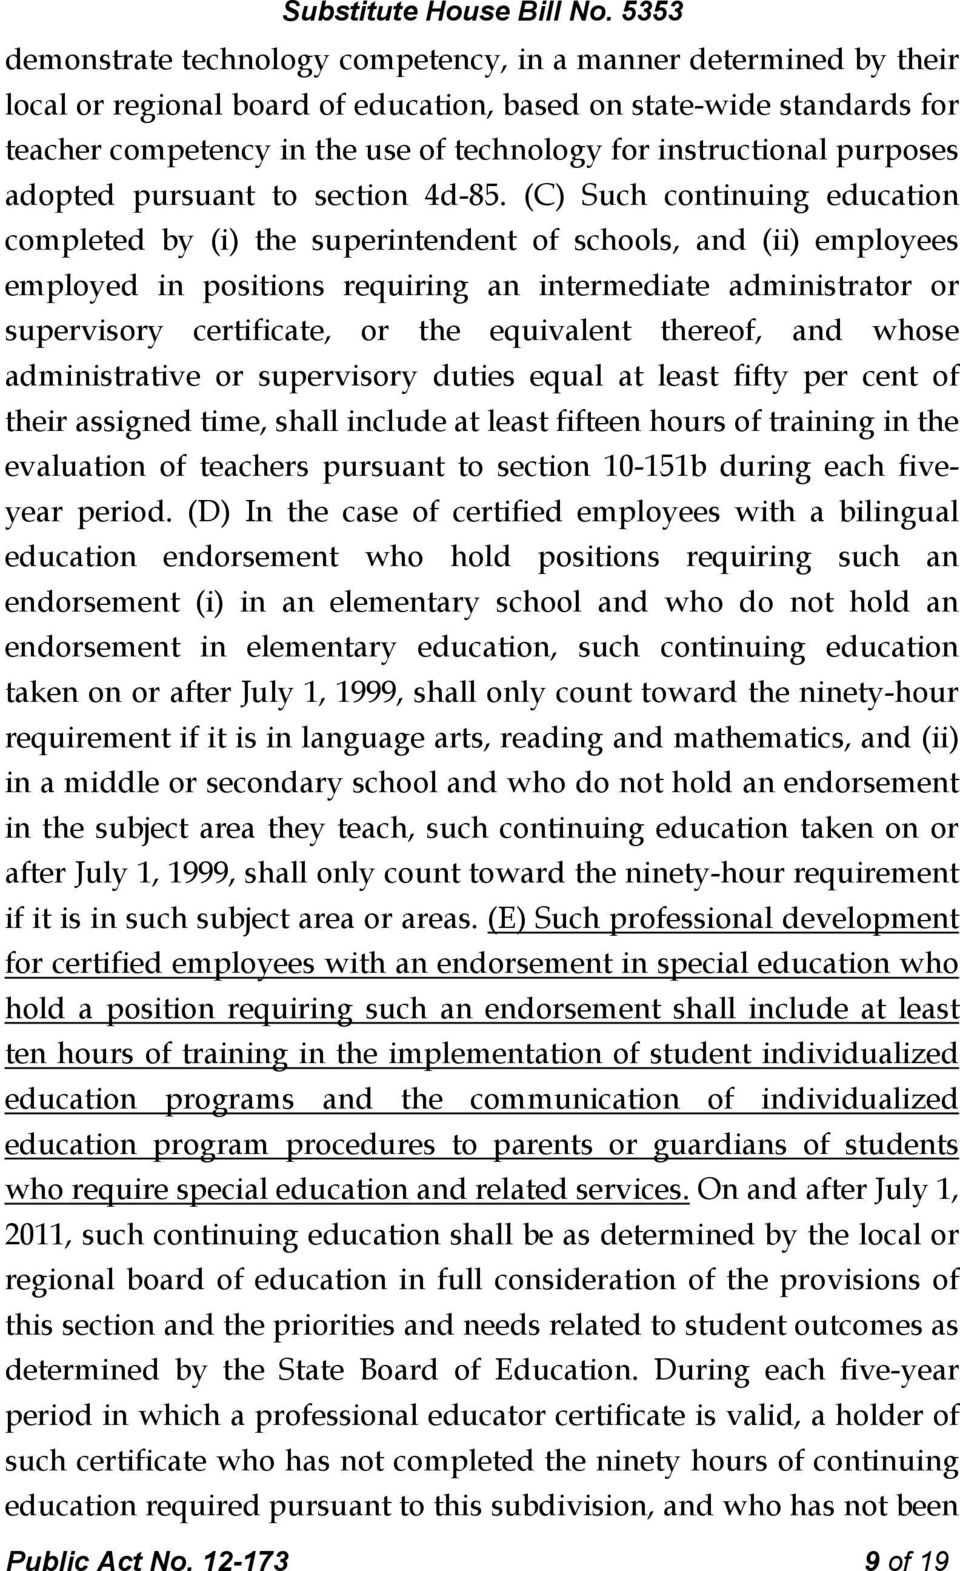 (C) Such continuing education completed by (i) the superintendent of schools, and (ii) employees employed in positions requiring an intermediate administrator or supervisory certificate, or the